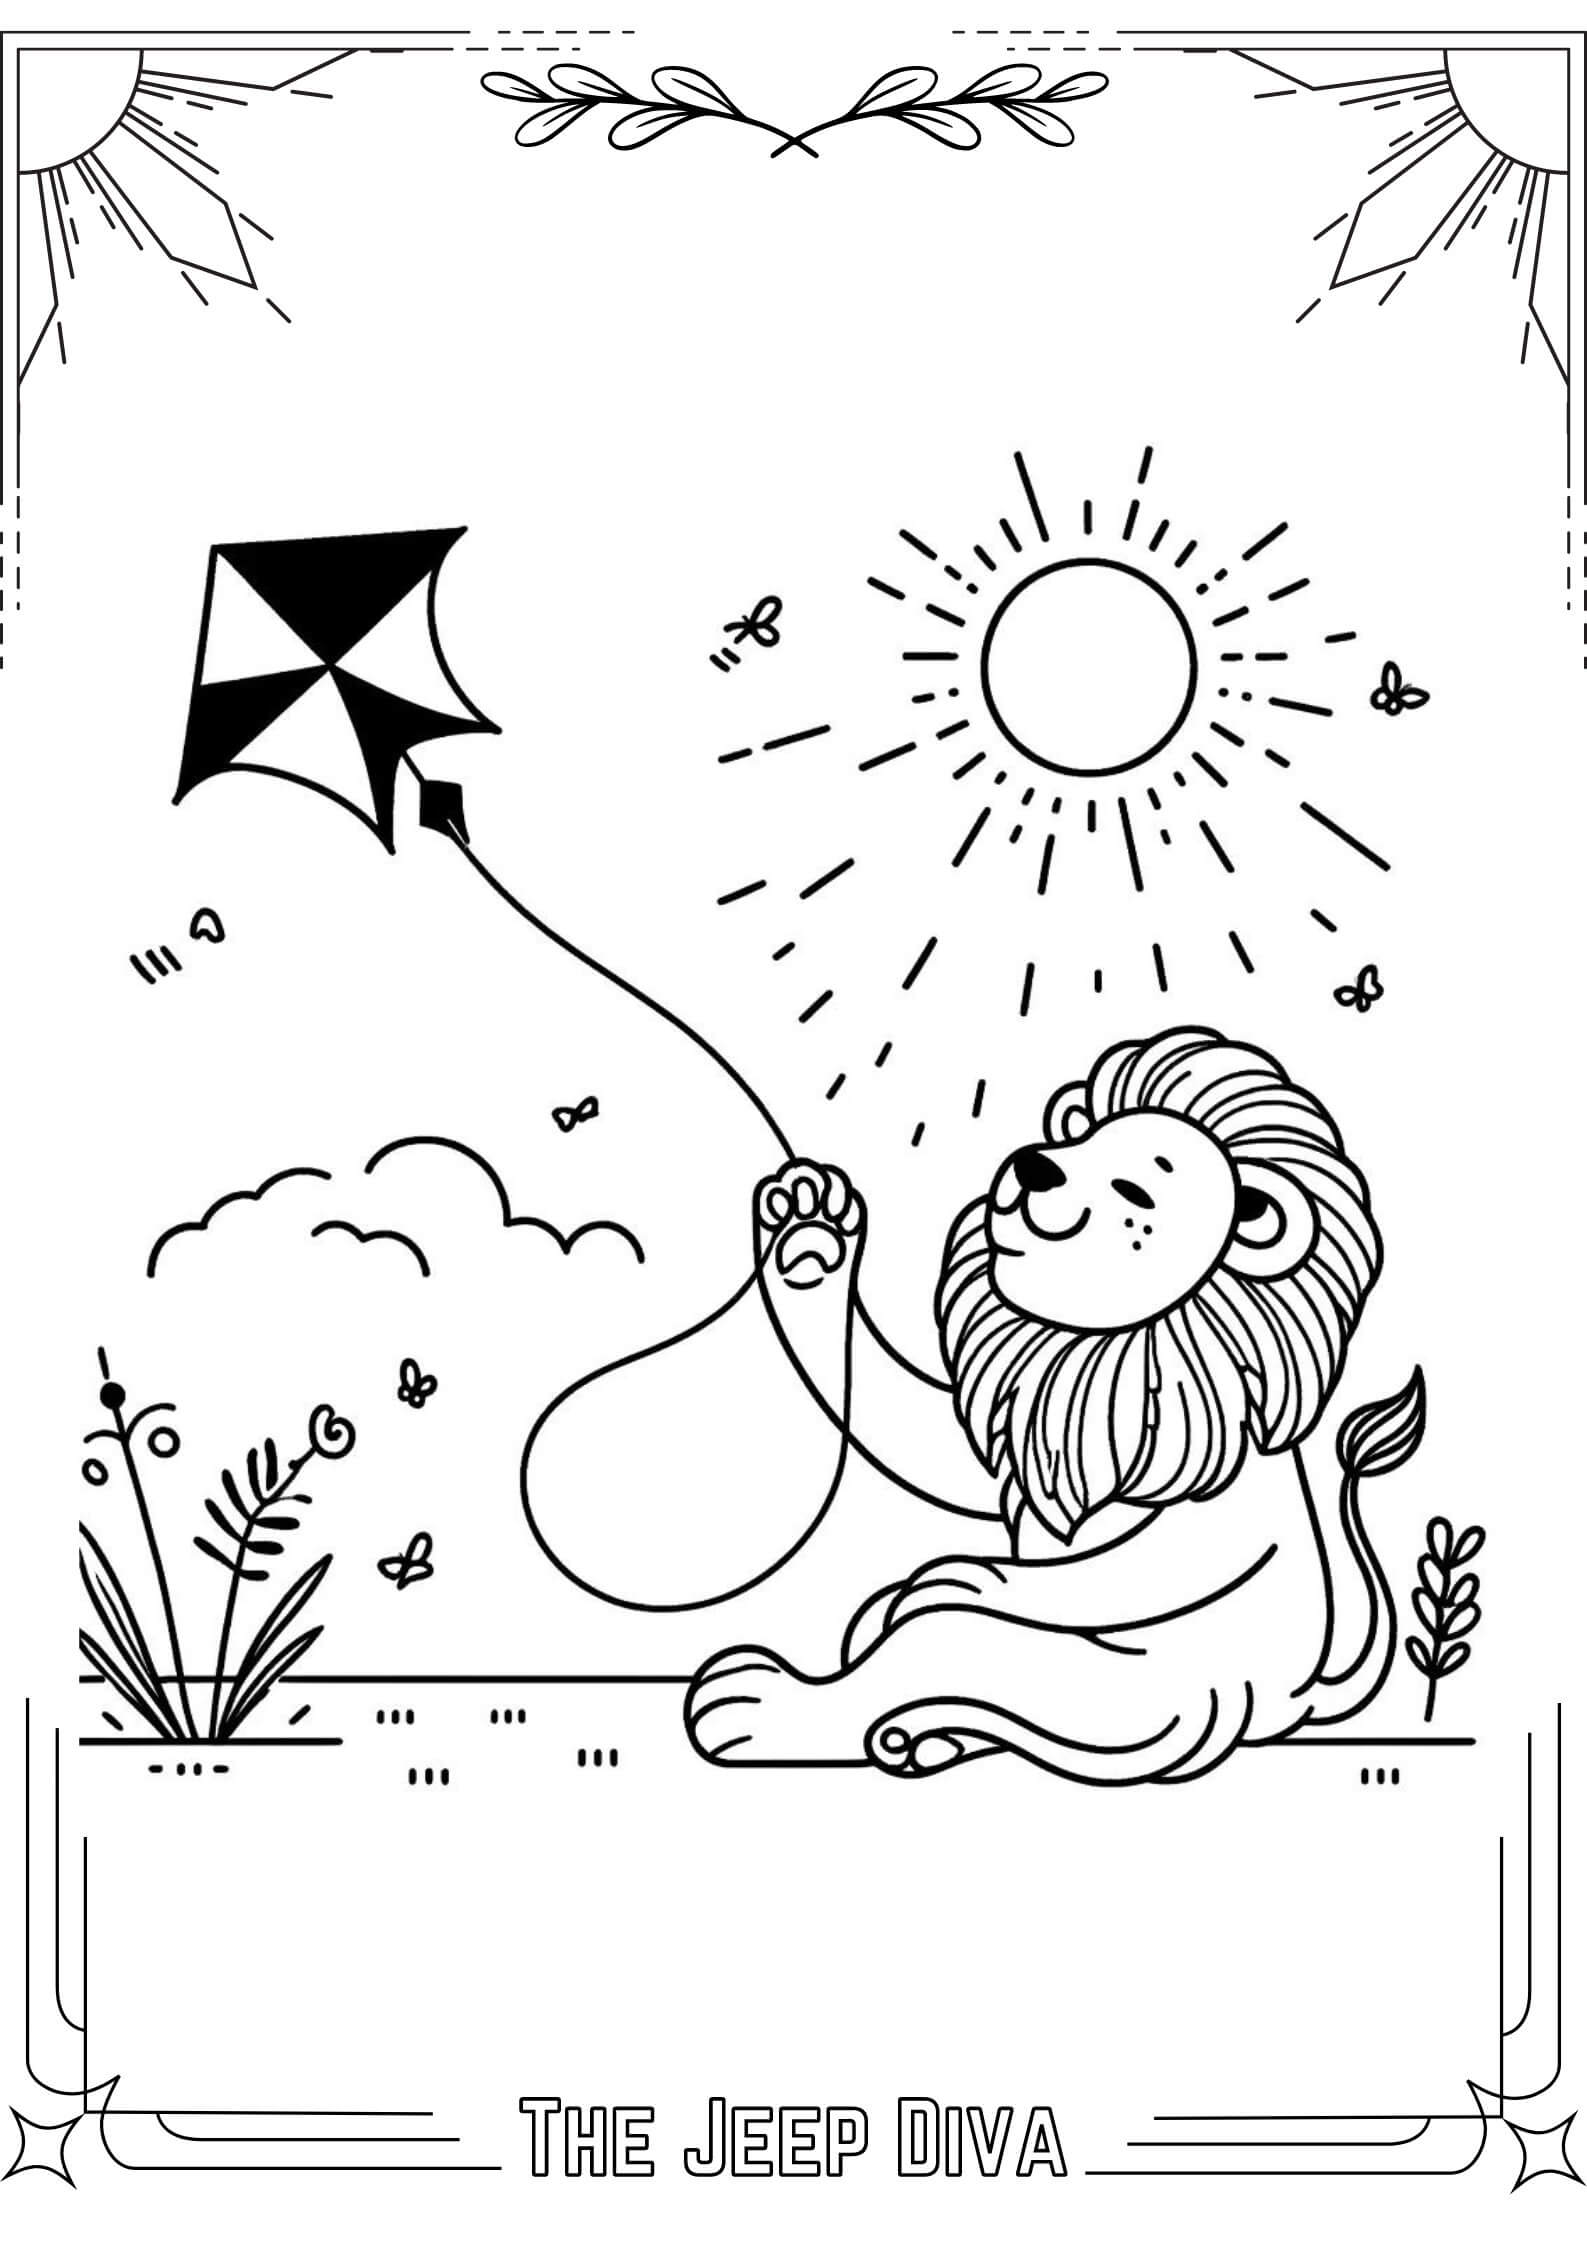 The Jeep Diva Coloring Page Lion Medium Difficulty 12